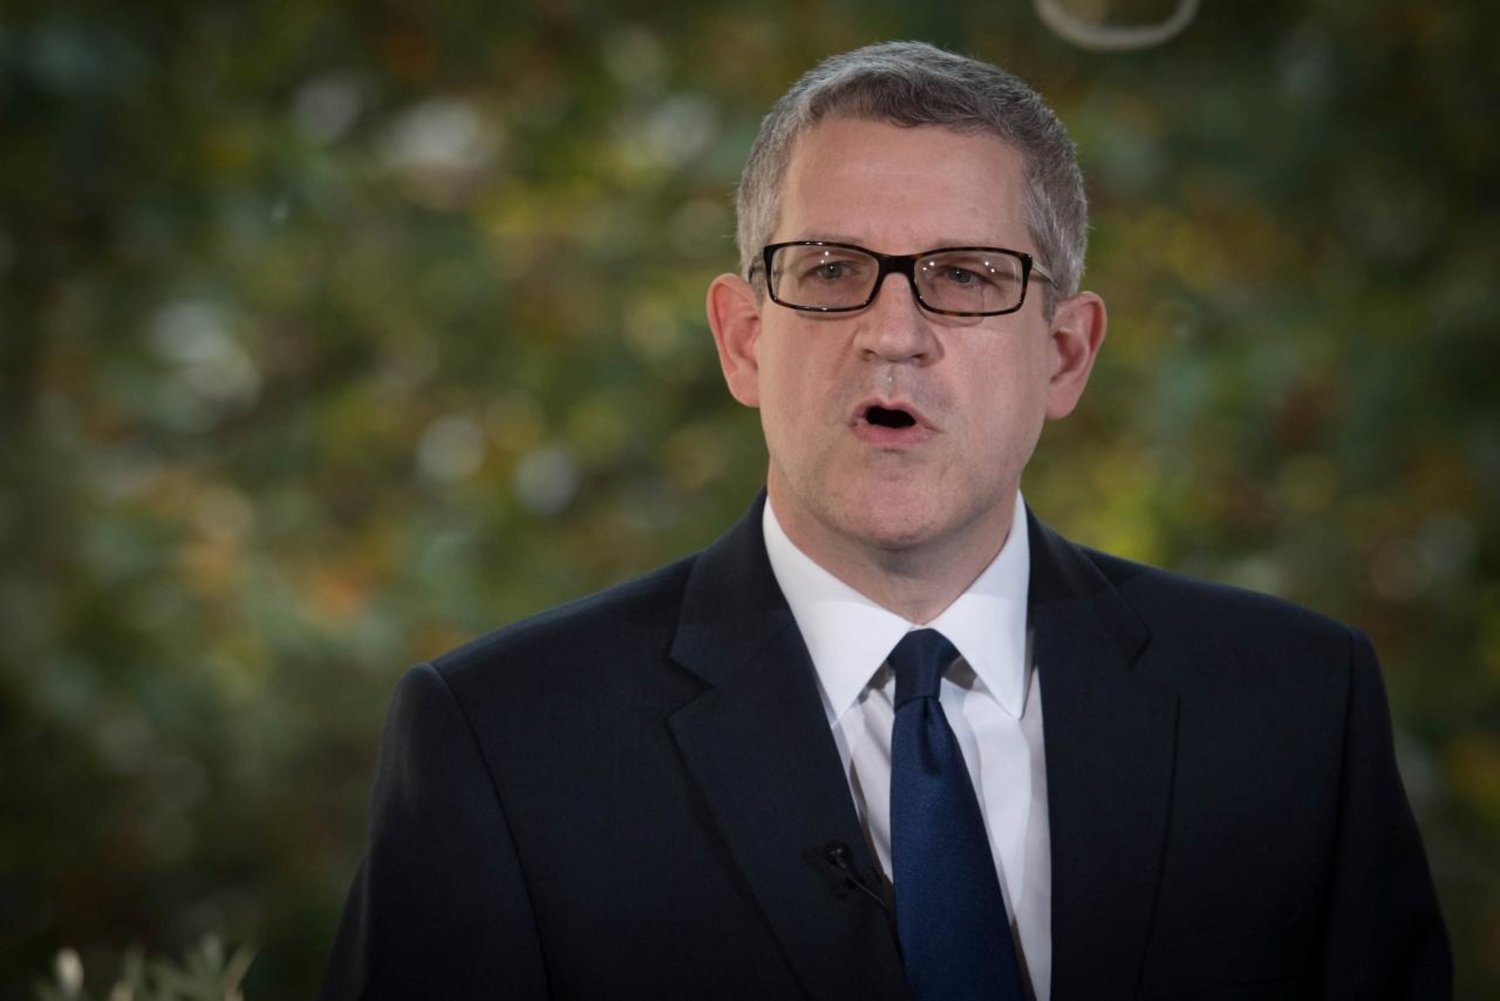 Director General of MI5 Andrew Parker delivers a speech in central London, on the security threat facing Britain October 17, 2017. REUTERS/Stefan Rousseau/Pool